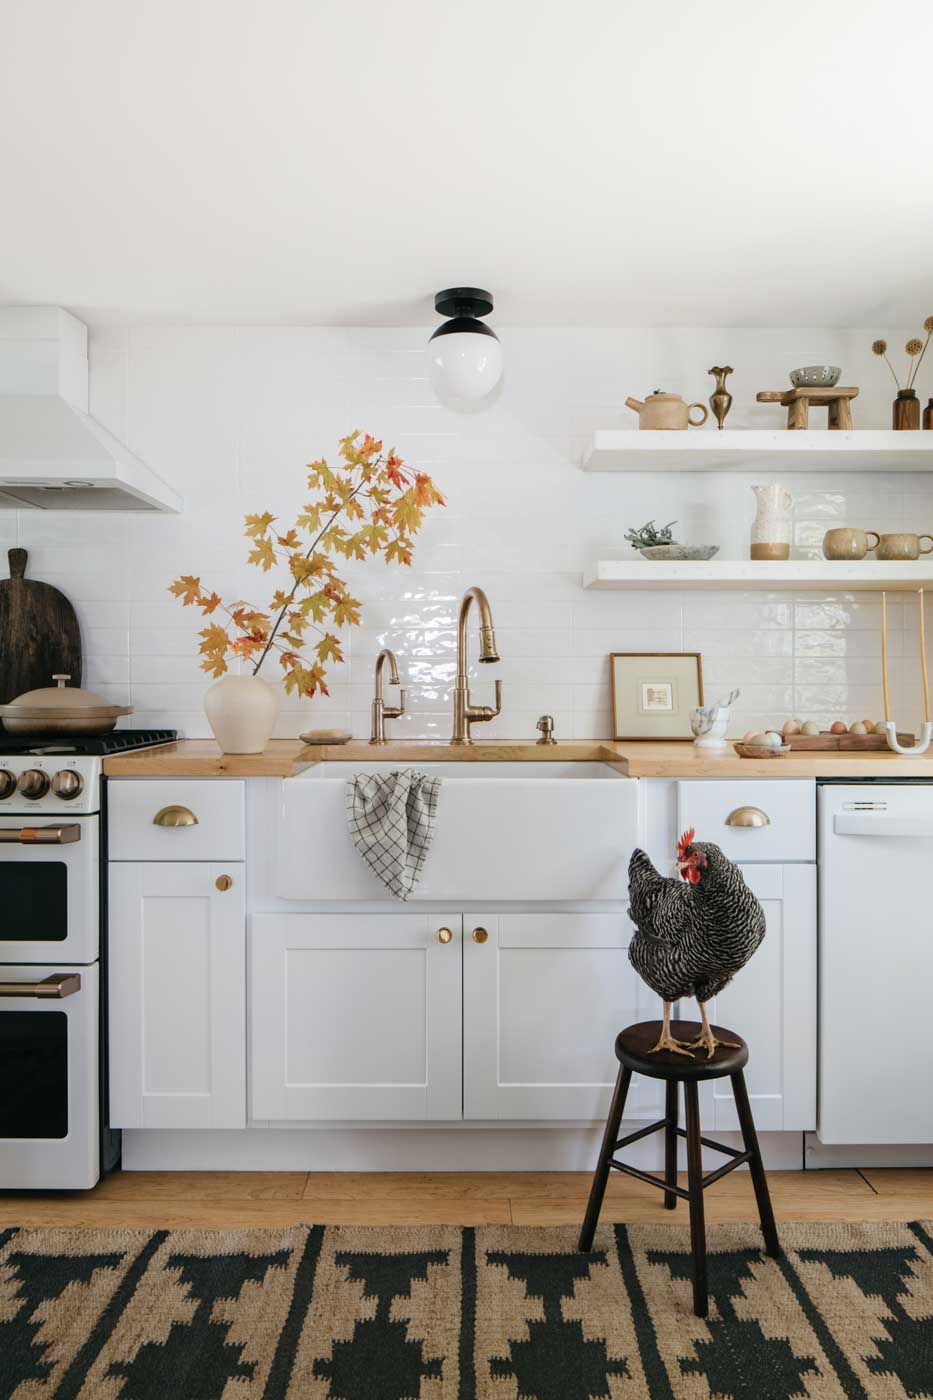 64 Indoor Outdoor Living With A Resident Chicken Taking Up A Stop On The Kitchen Stool